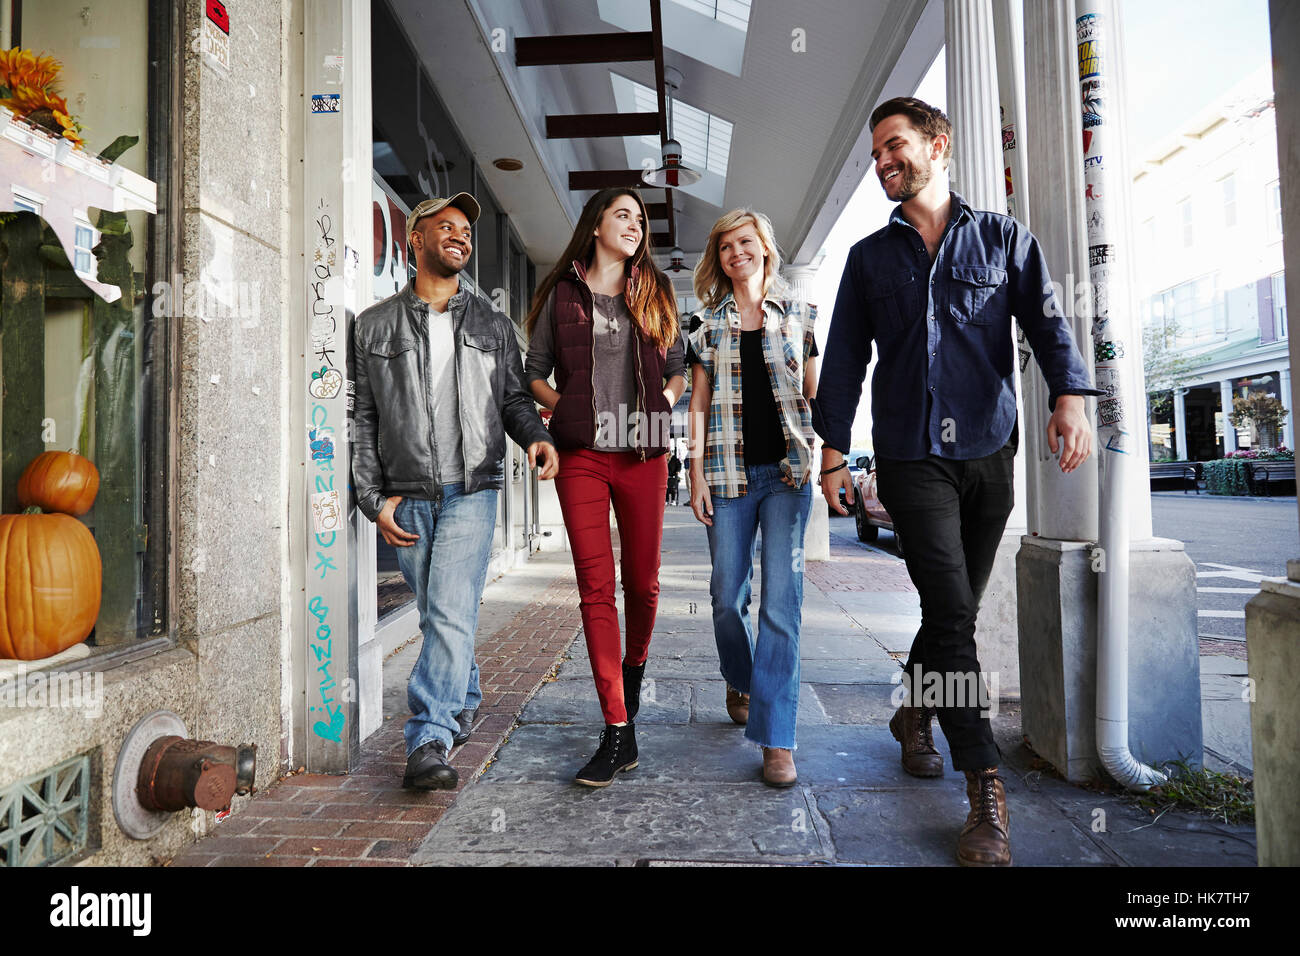 Two young men and two young women walking along a sidewalk, smiling. Stock Photo